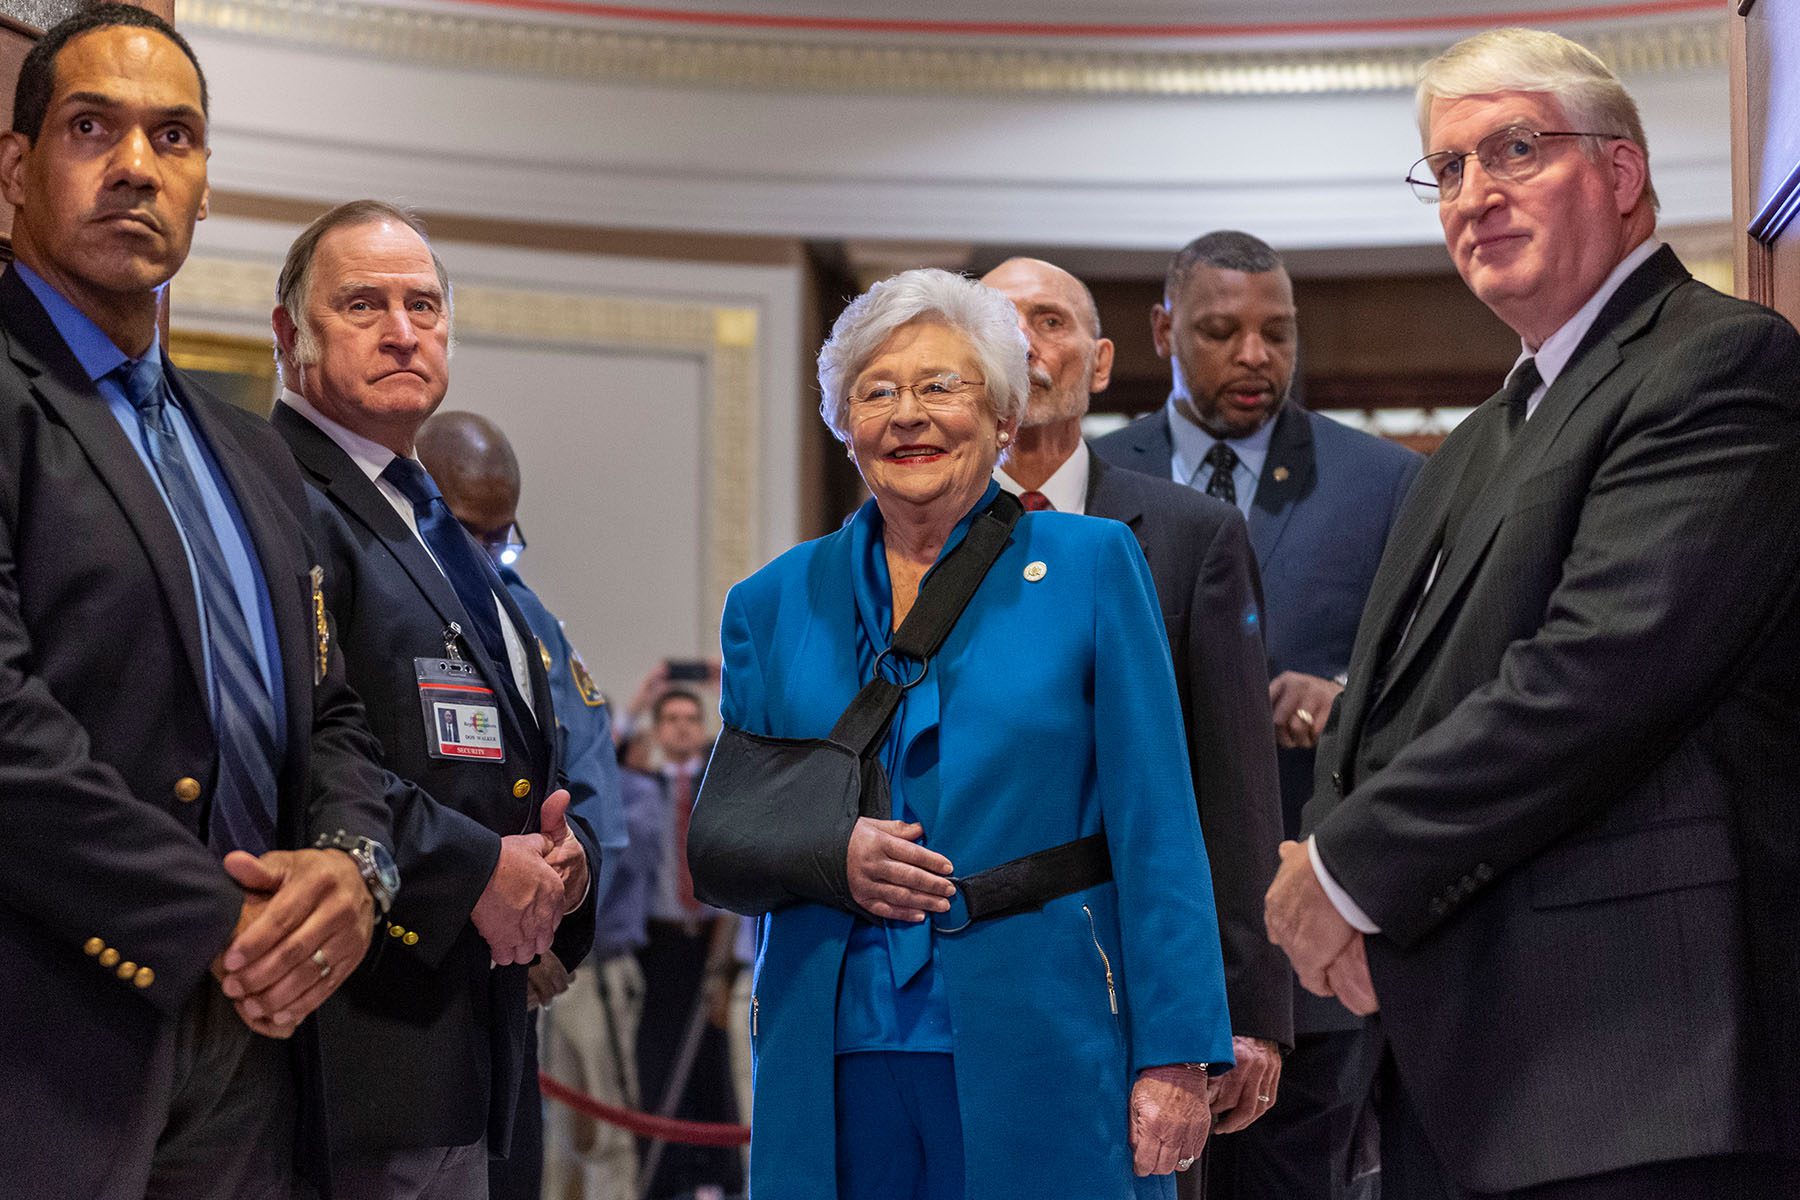 Kay Ivey enters the chamber to give the State of the State address to a joint session of the Alabama Legislature.